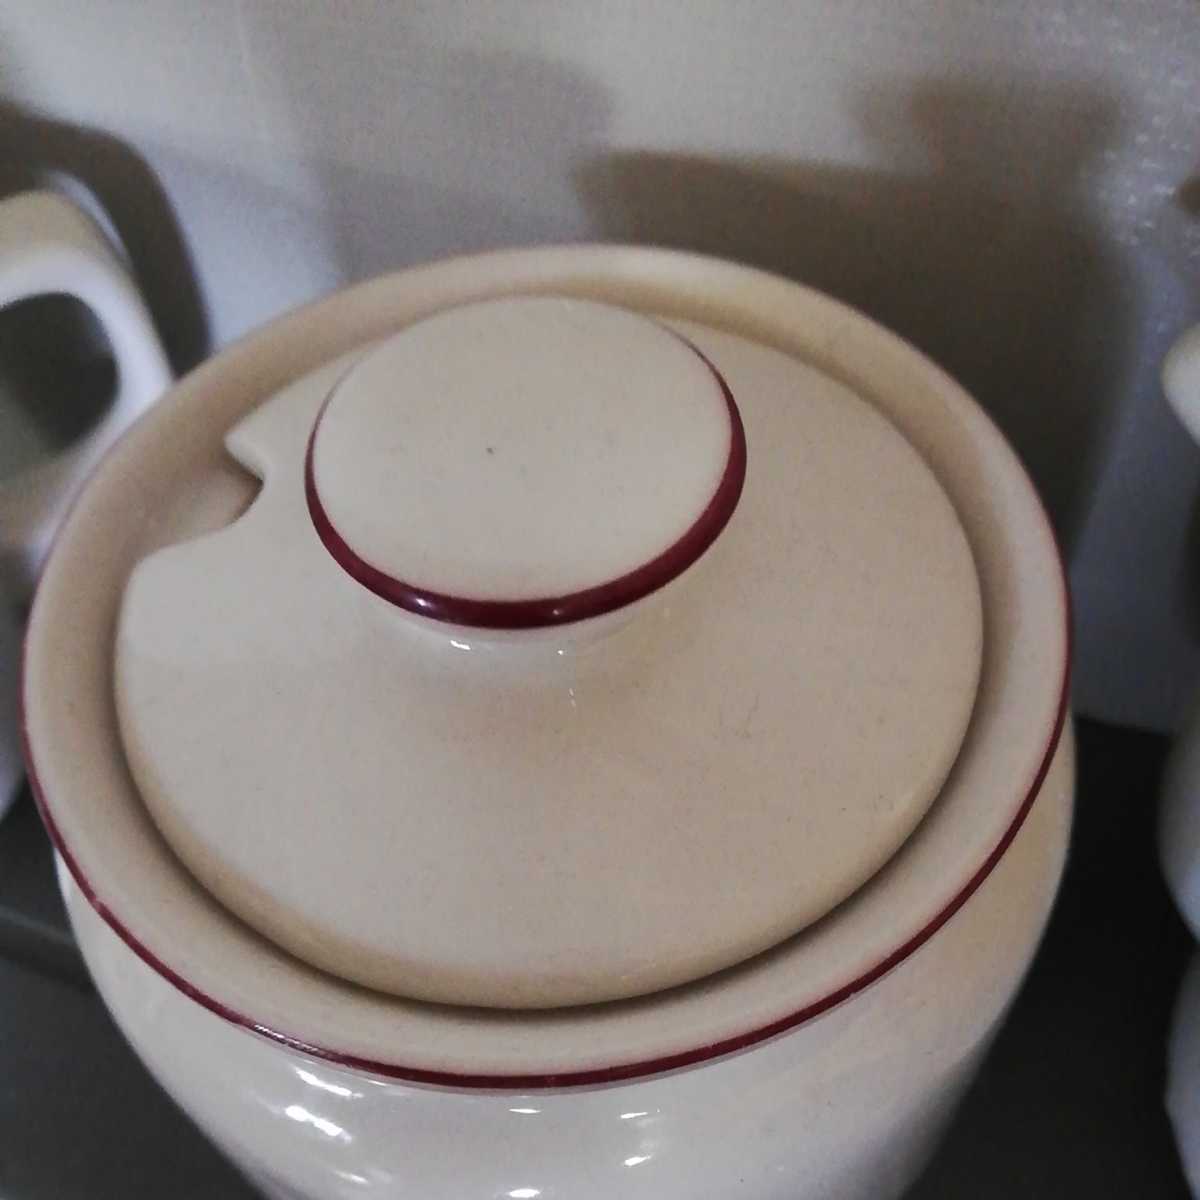  mistake do Mr. do- nuts sugar pot unused not for sale Novelty -